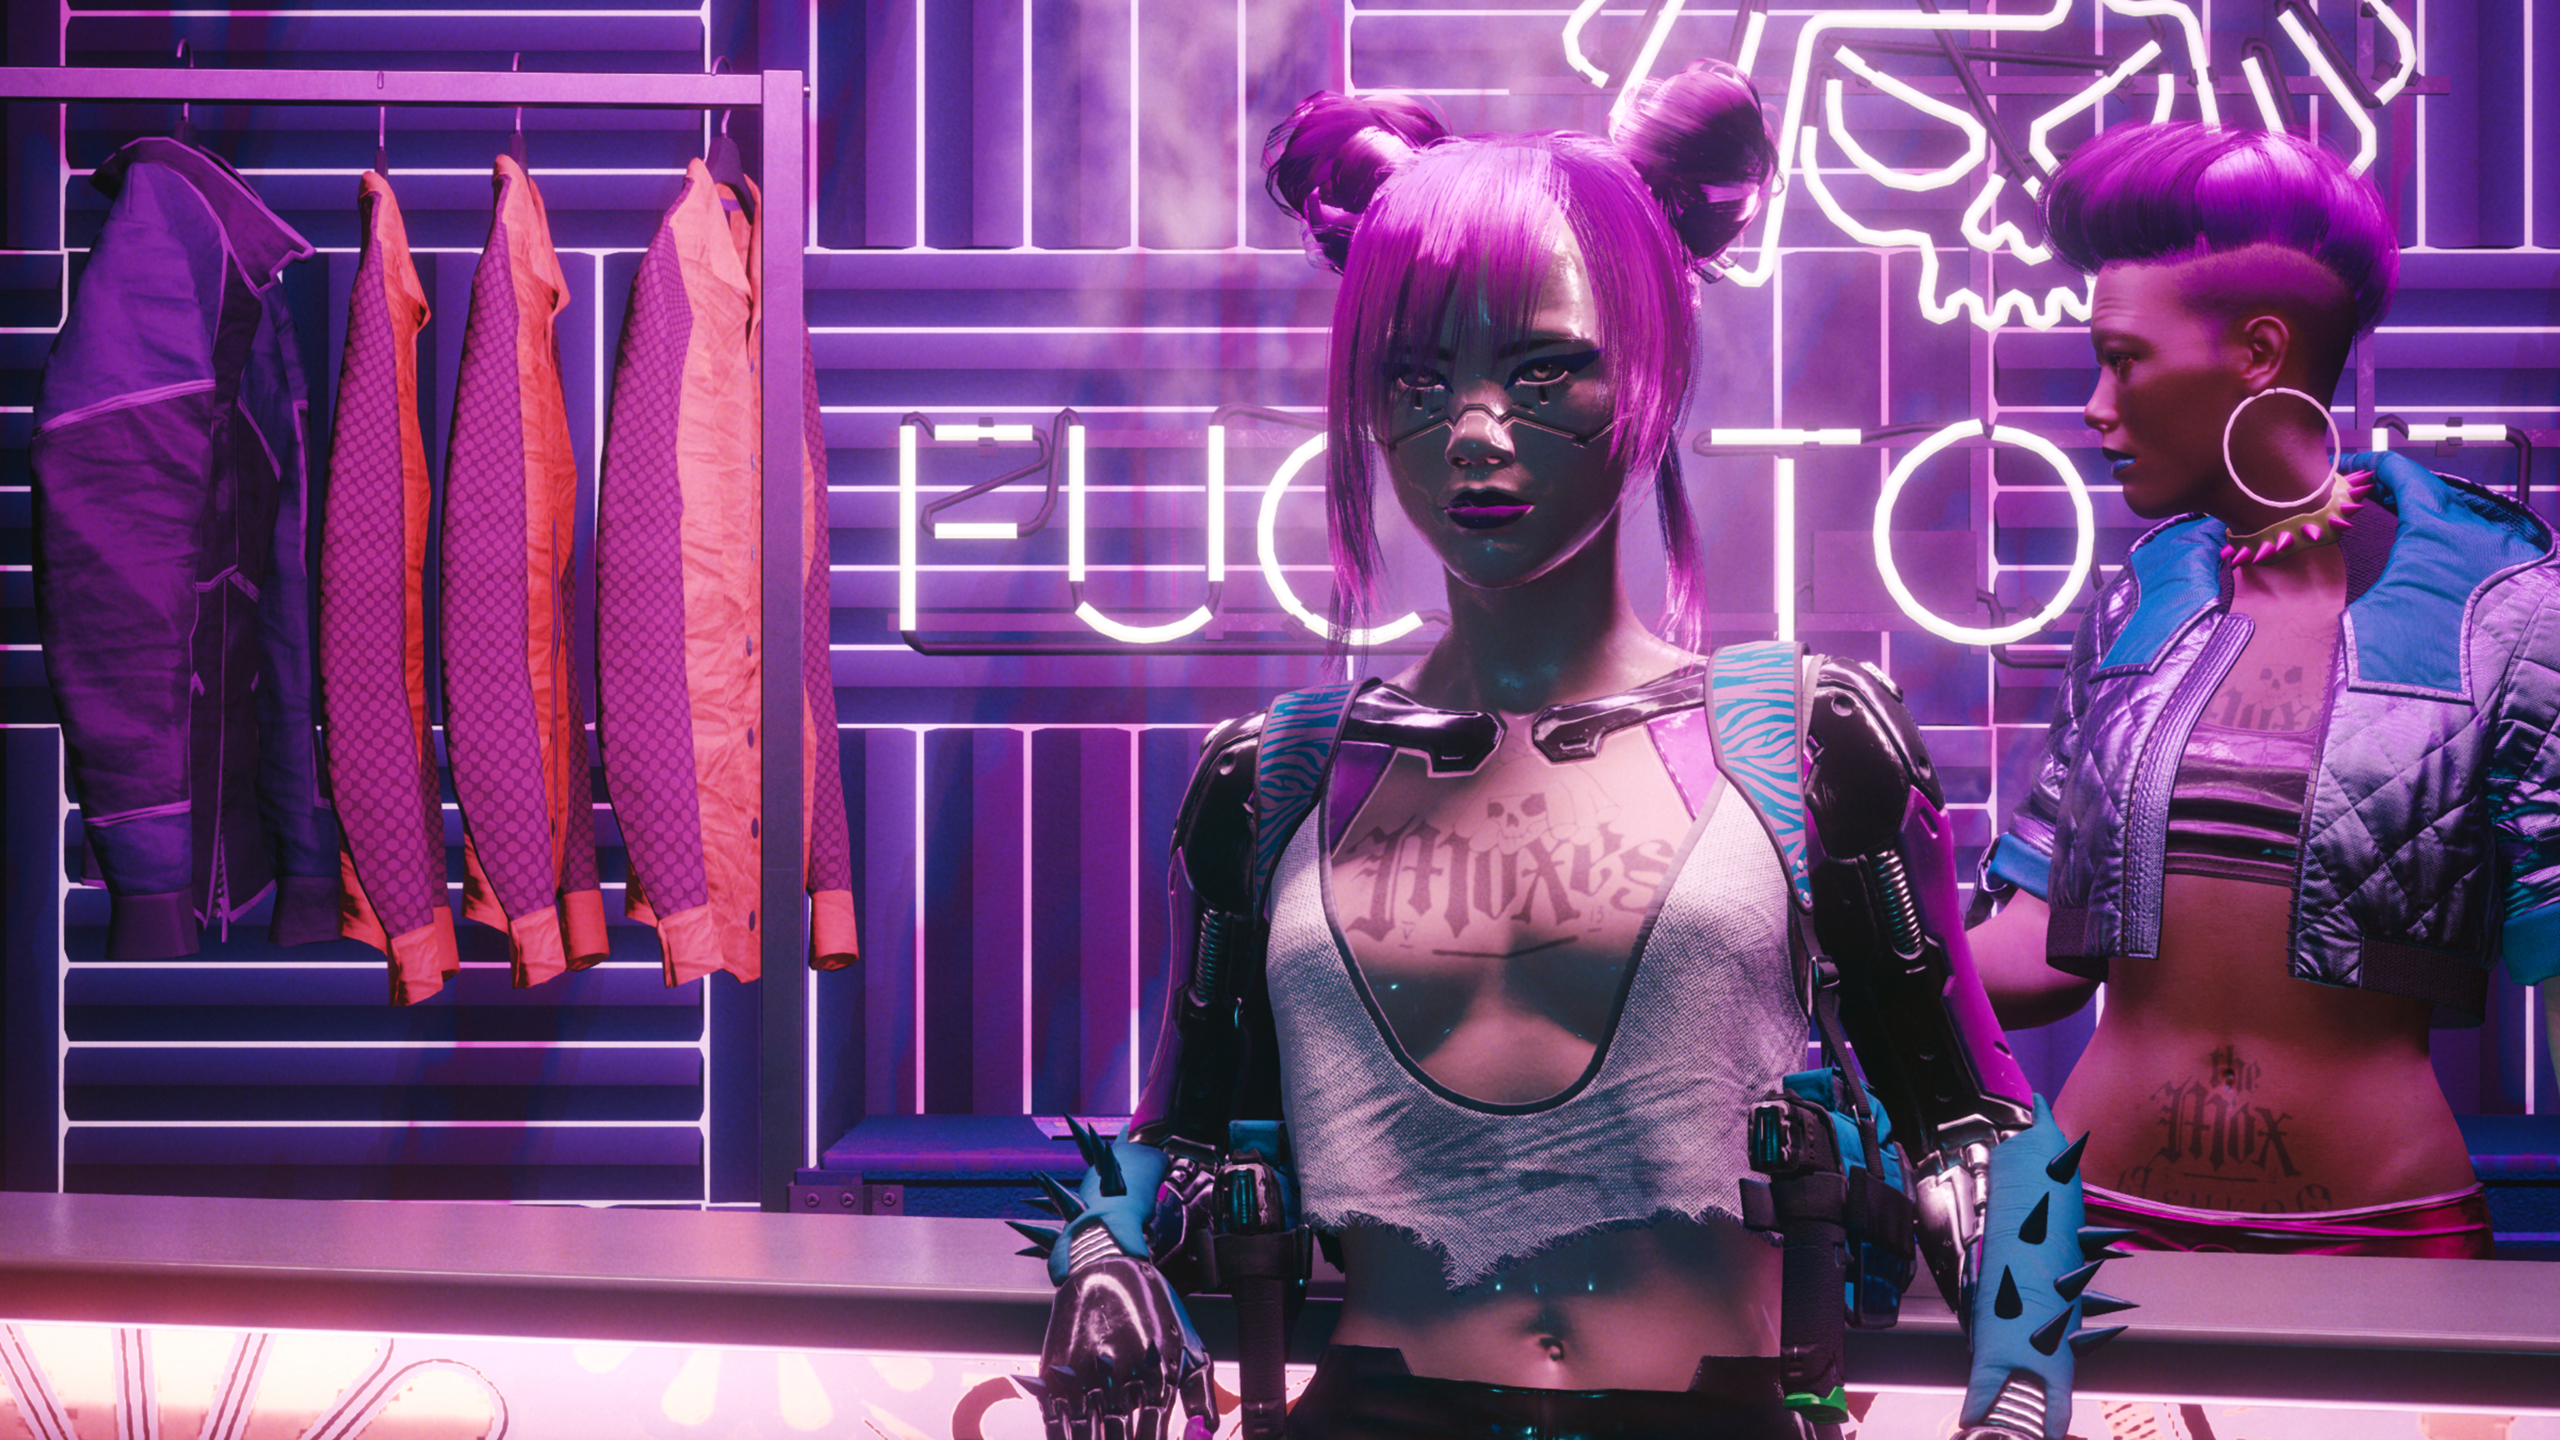  It sounds like CD Projekt is rolling right into the Cyberpunk 2077 sequel when Phantom Liberty is finished 